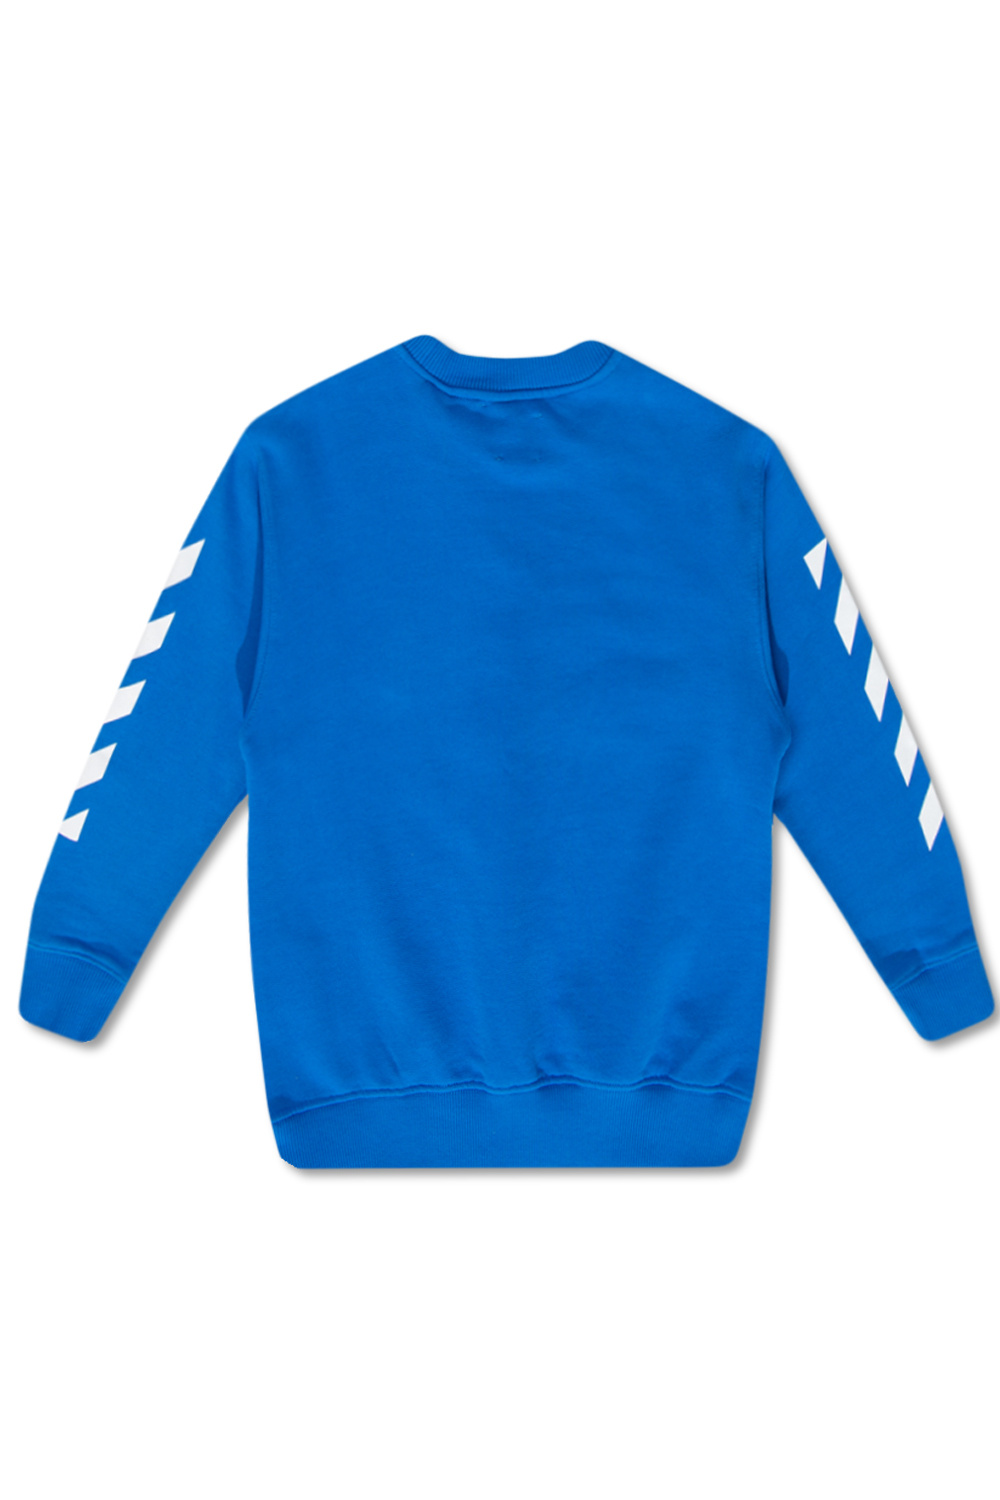 Off-White Kids Only Tall Pullover bianco blu ciano rosso violaceo